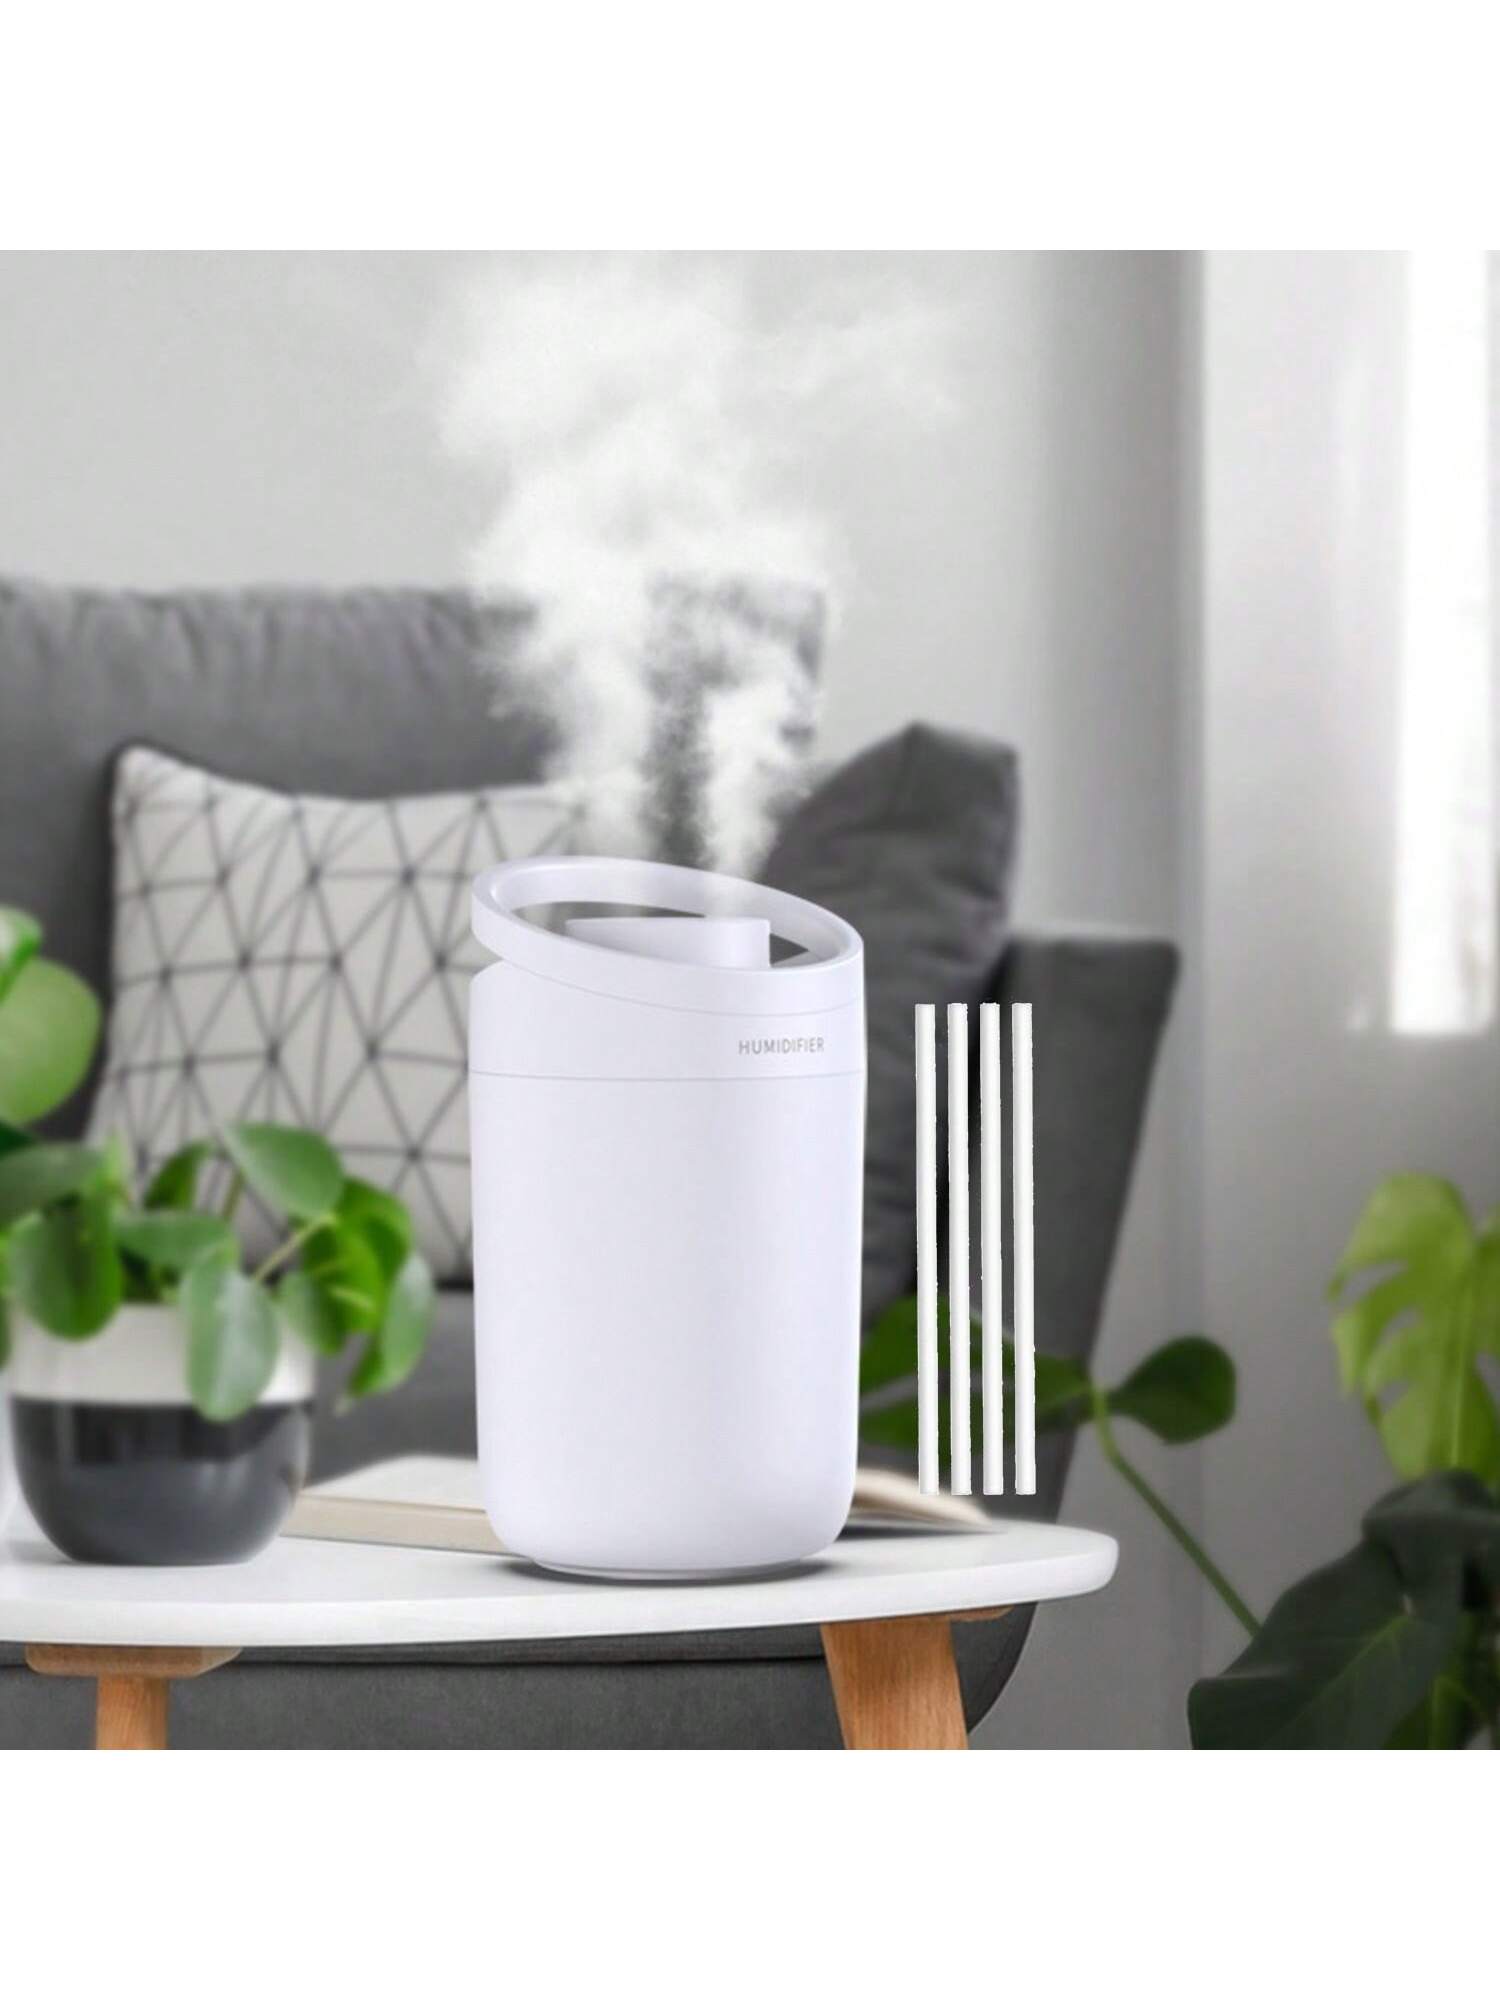 1pc Usb Plug 3000ml Large Capacity Double Nozzle Humidifier X11, Directly Add Water From The Top, Suitable For Room, Plant Room-White-10